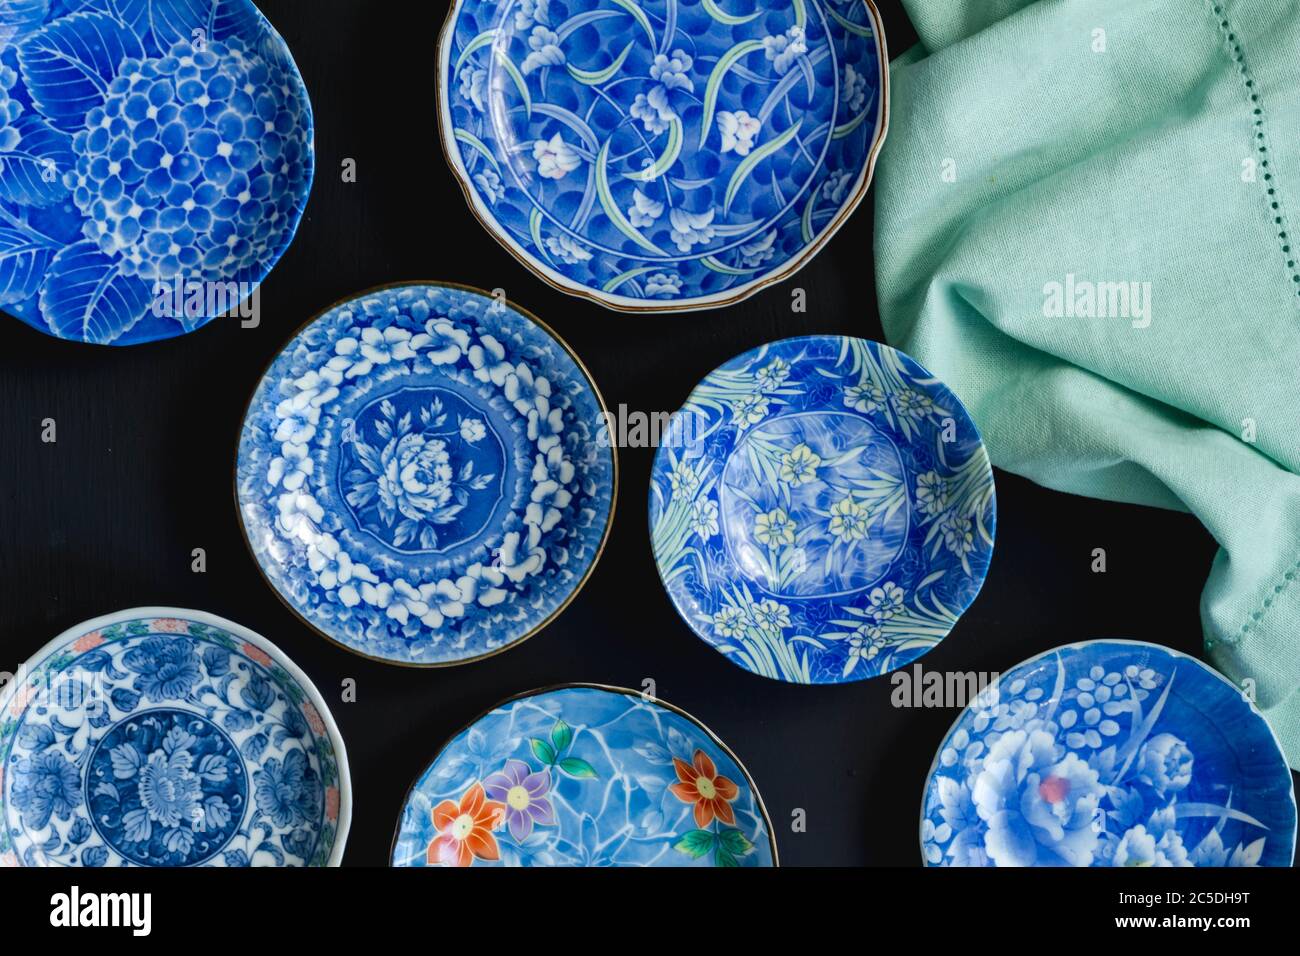 Blue and white decorative Japanese ceramic plates on black background - Top view photo Stock Photo